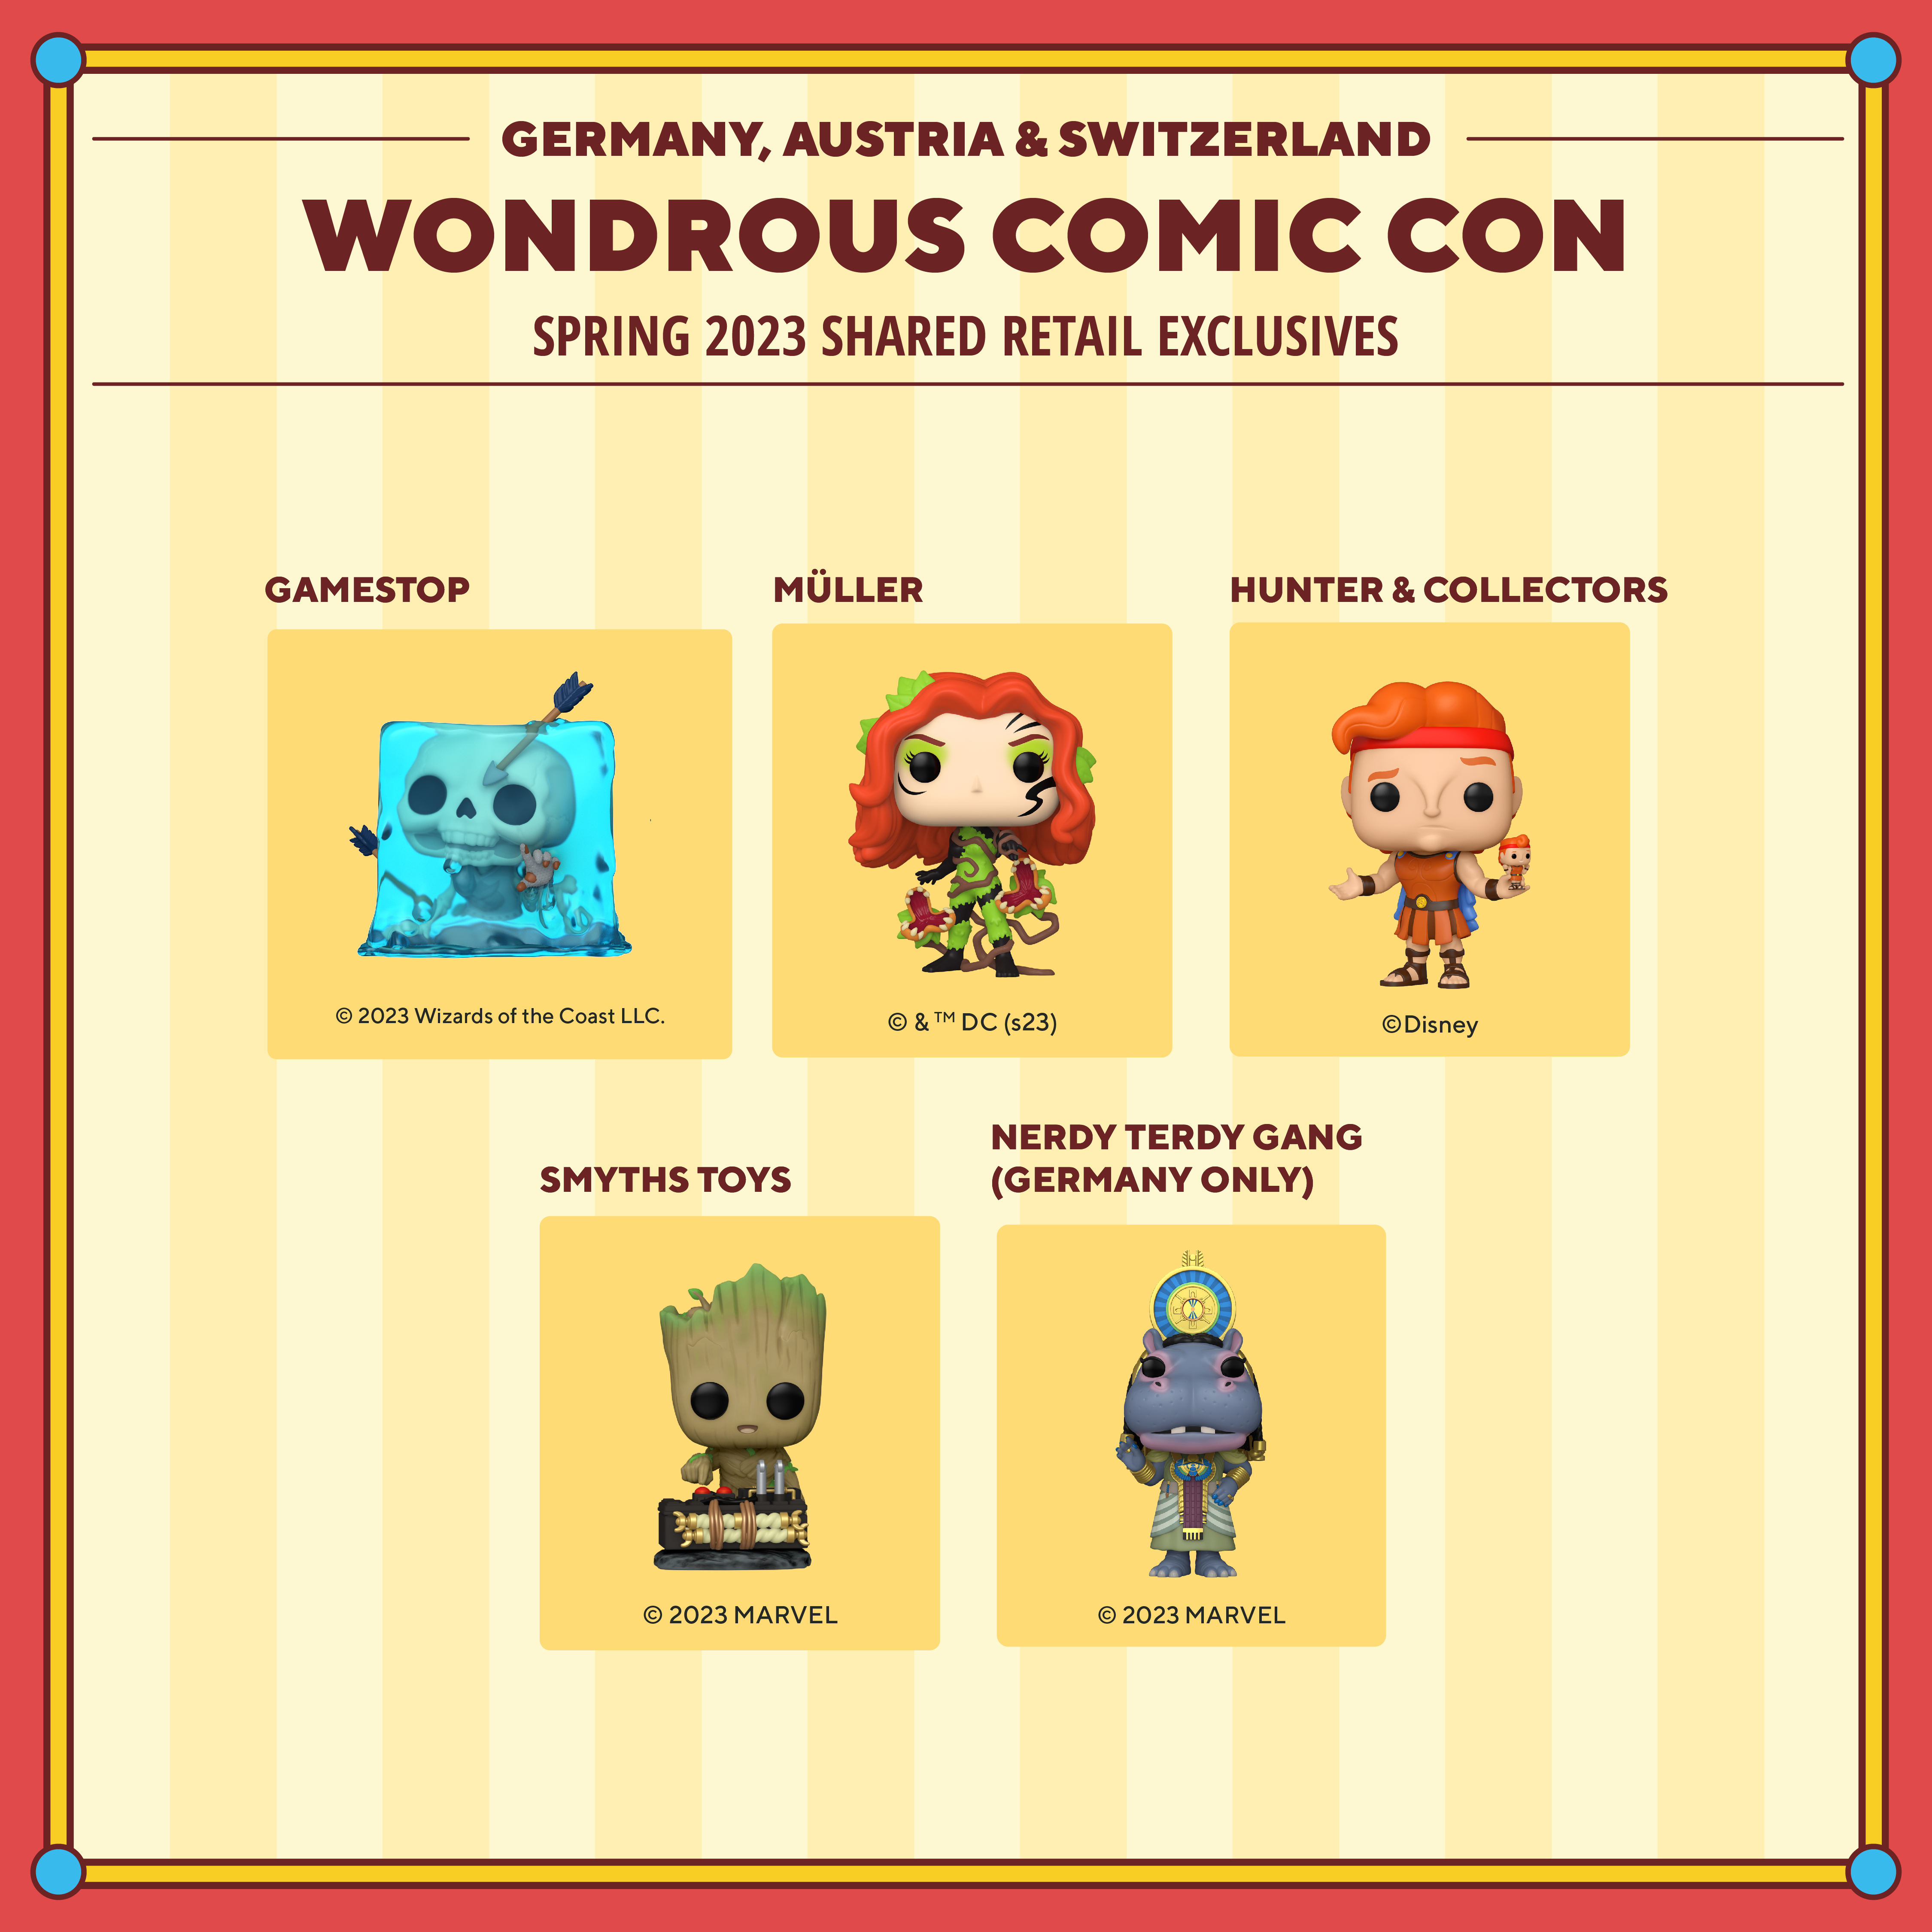 2023 WonderCon Germany, Austria & Switzerland Spring shared retail exclusives. GameStop exclusives include: Pop! Gelatinous Cube. Muller exclusives include: Pop! Poison Ivy. Hunter & Collectors exclusives include: Pop! Hercules with Action Figure. Smyths Toys exclusives include: Pop! Baby Groot with Detonator. Nerdy Terdy Gang (Germany only) exclusives include: Pop! Taweret.